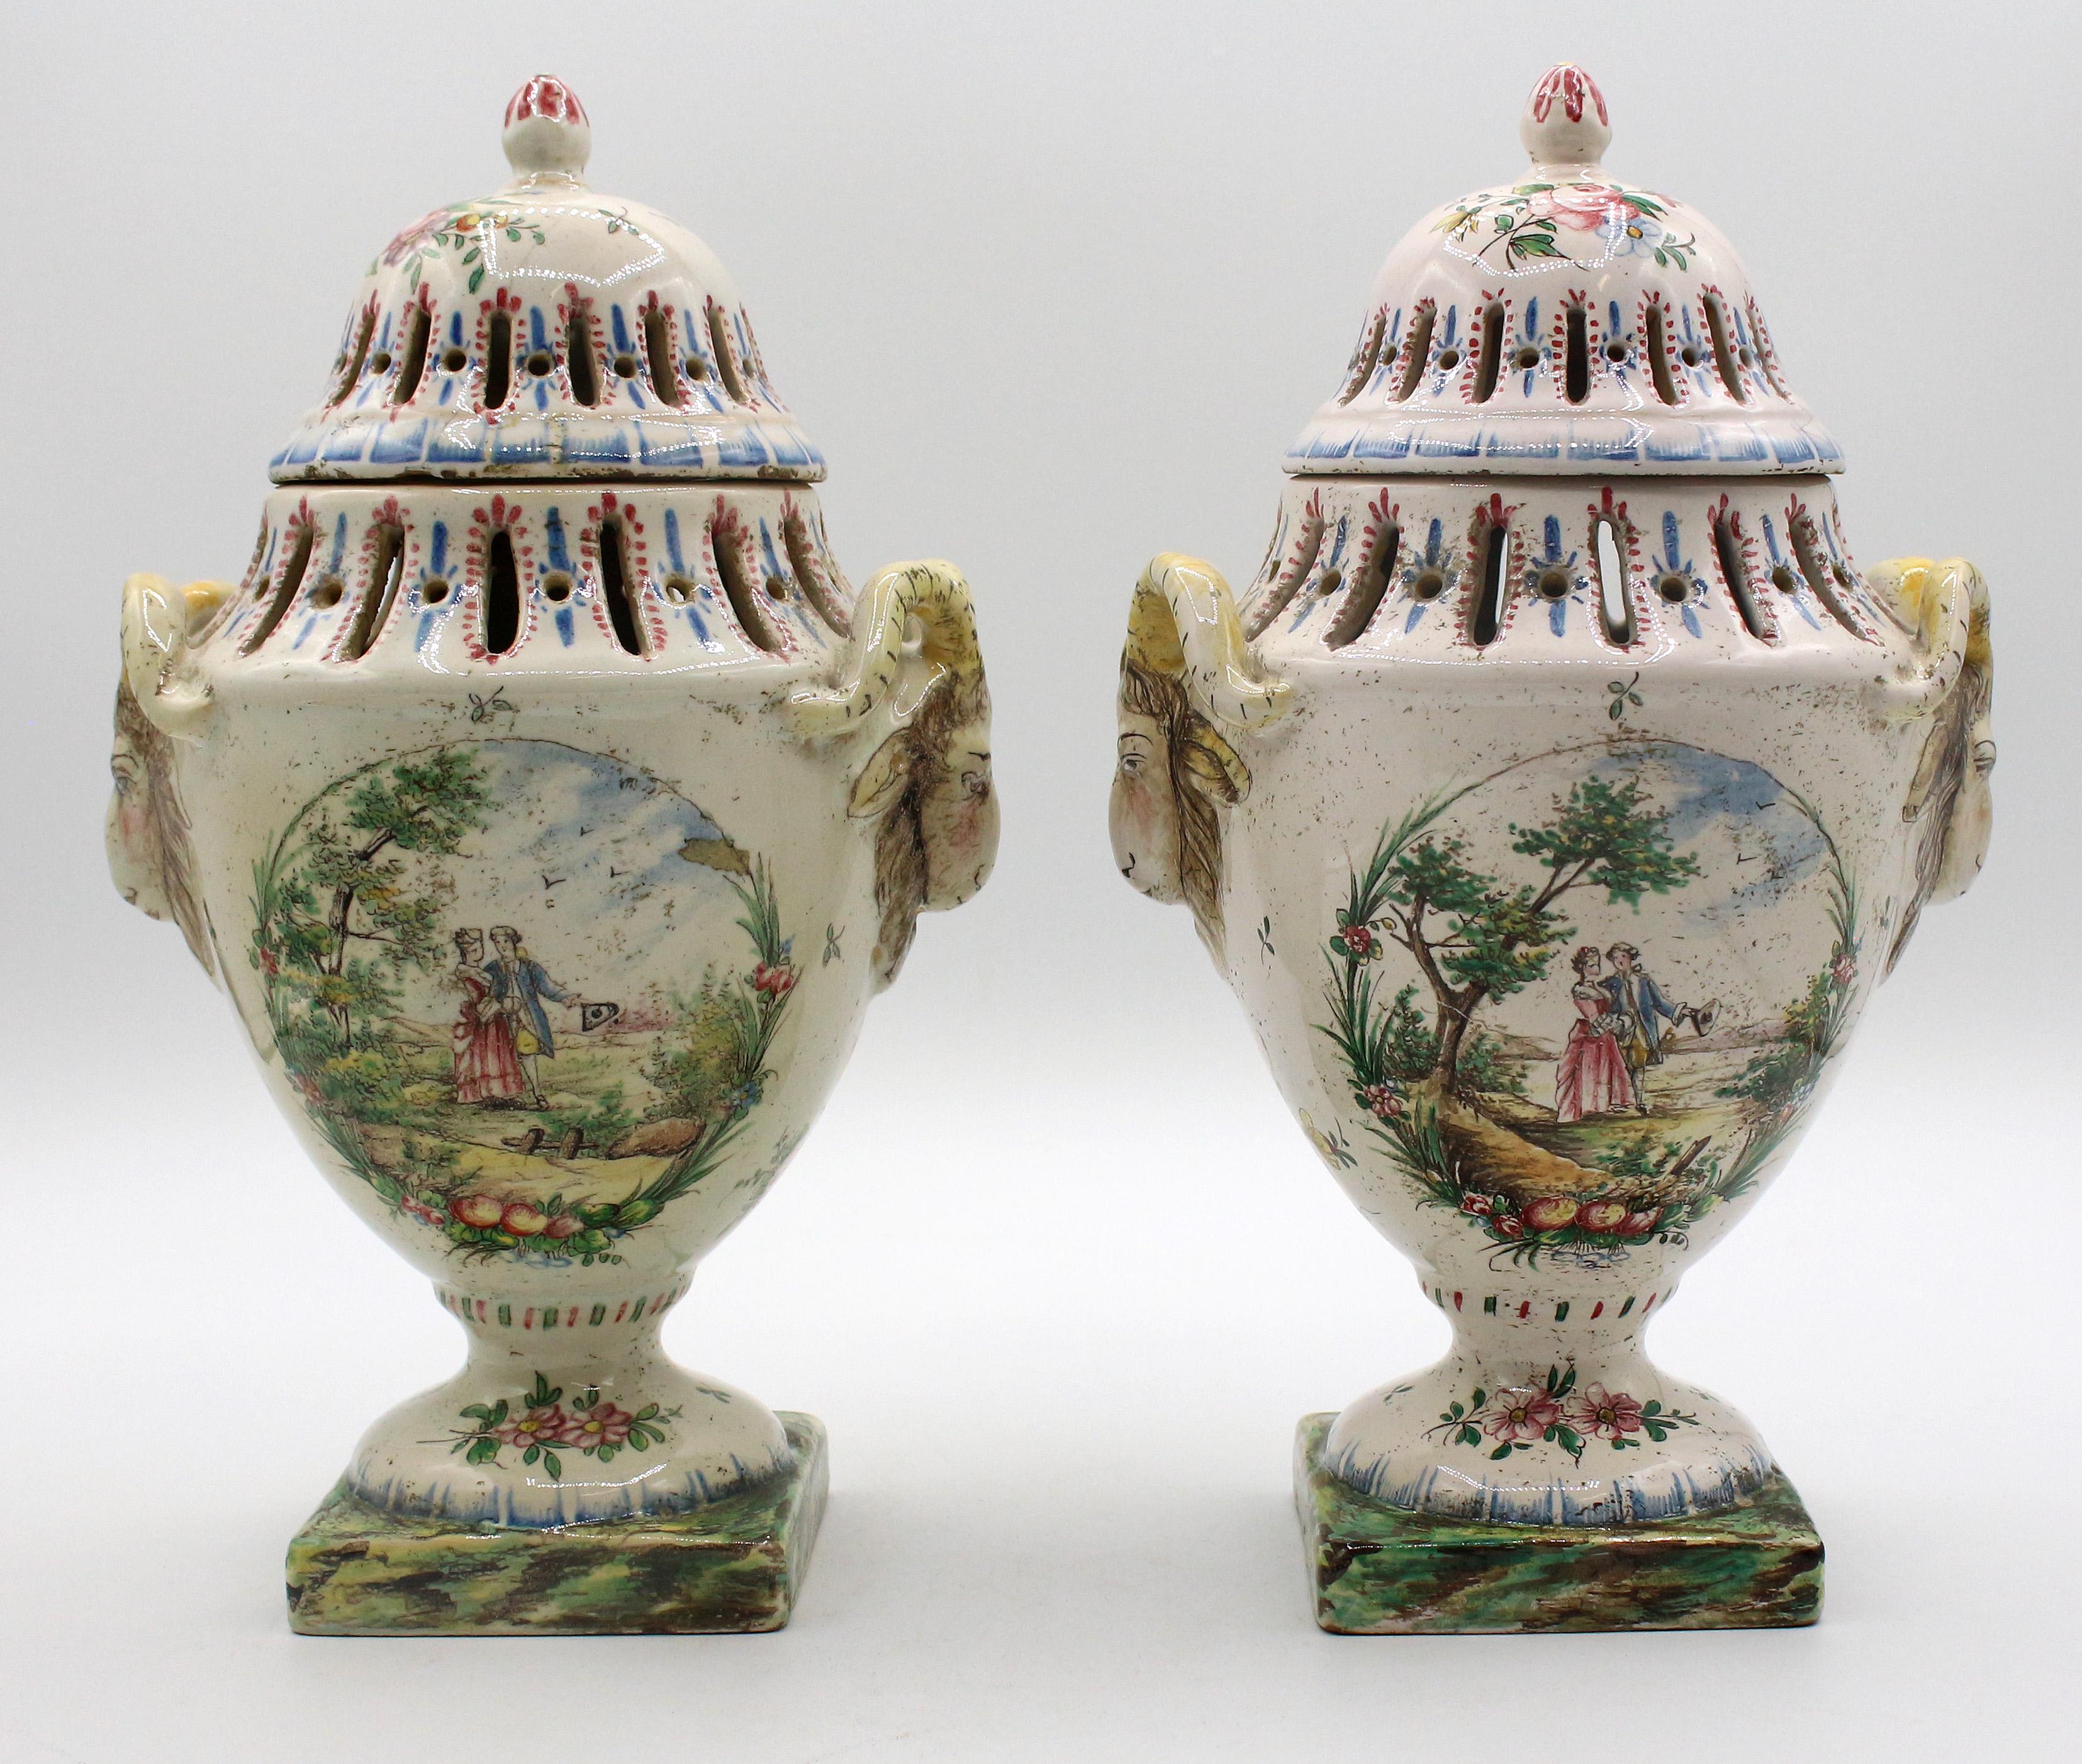 Pair of covered potpourri urns, French, last quarter 18th century. Faience. Neo-classical design & period. Goat mask handles. Romantic scene of a couple. 9 3/4